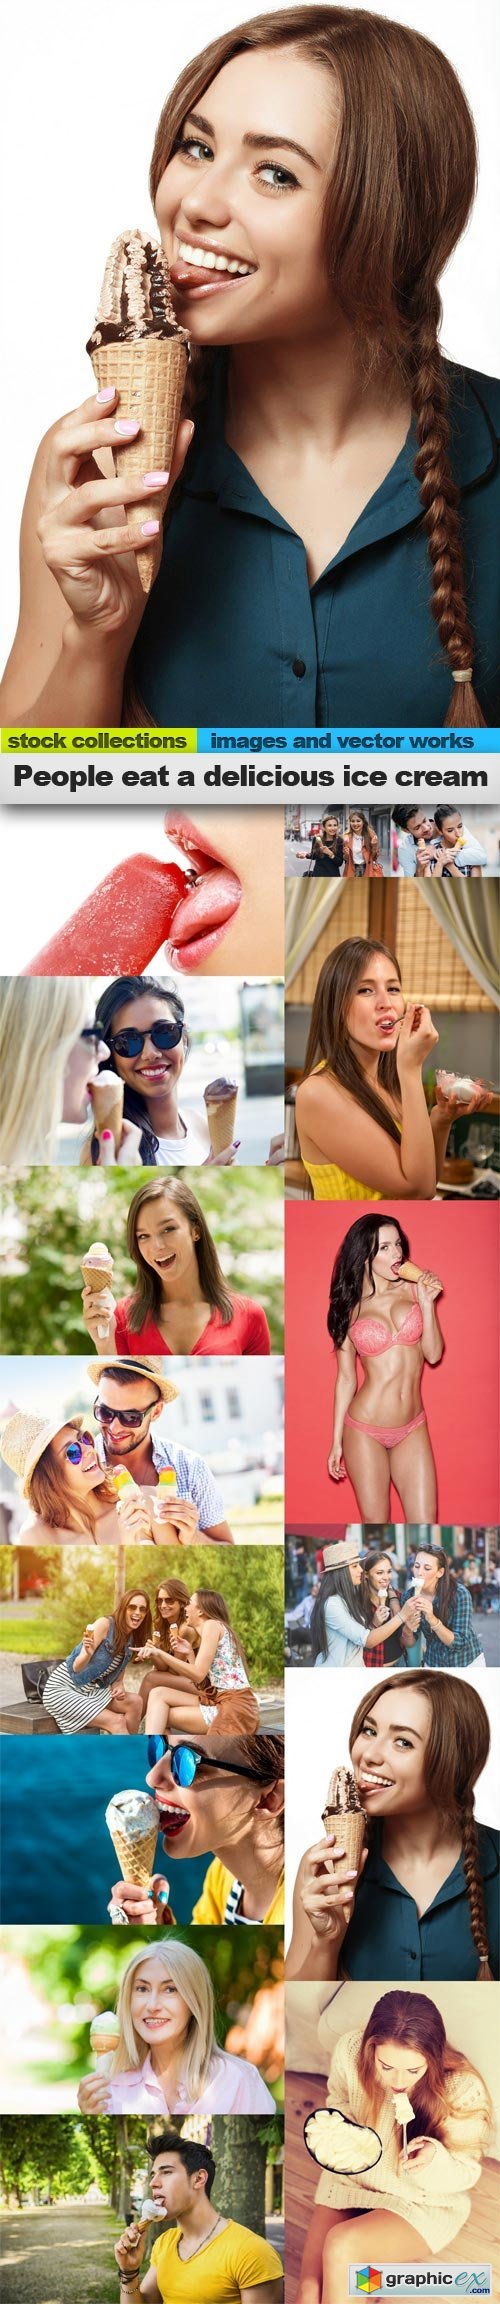 People eat a delicious ice cream, 15 x UHQ JPEG